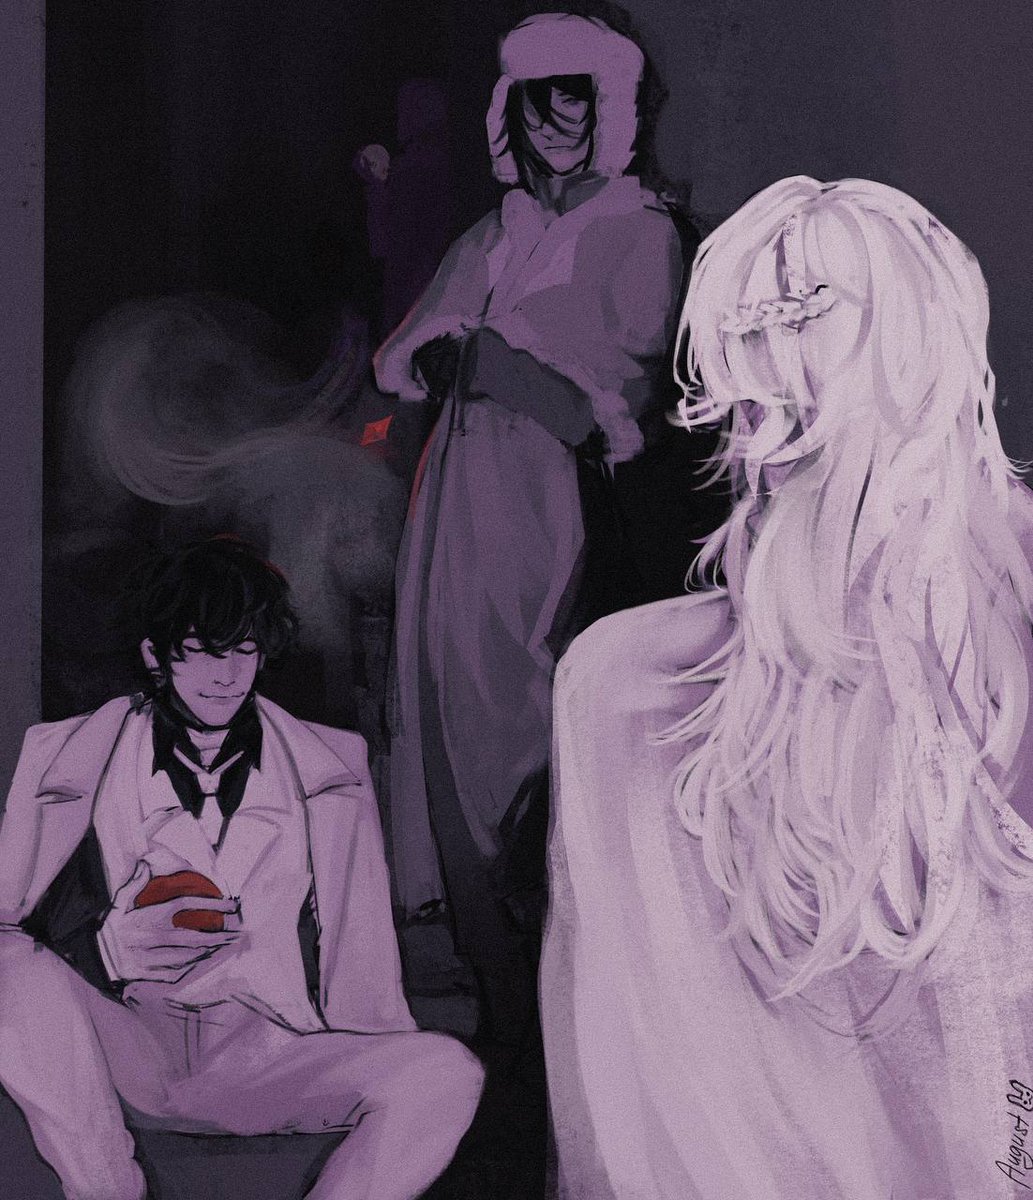 Dead apple trio

three people meet on the dark streets of the city
and troubles cannot be avoided

#shibusawa #dazai #fyodor
#bsd